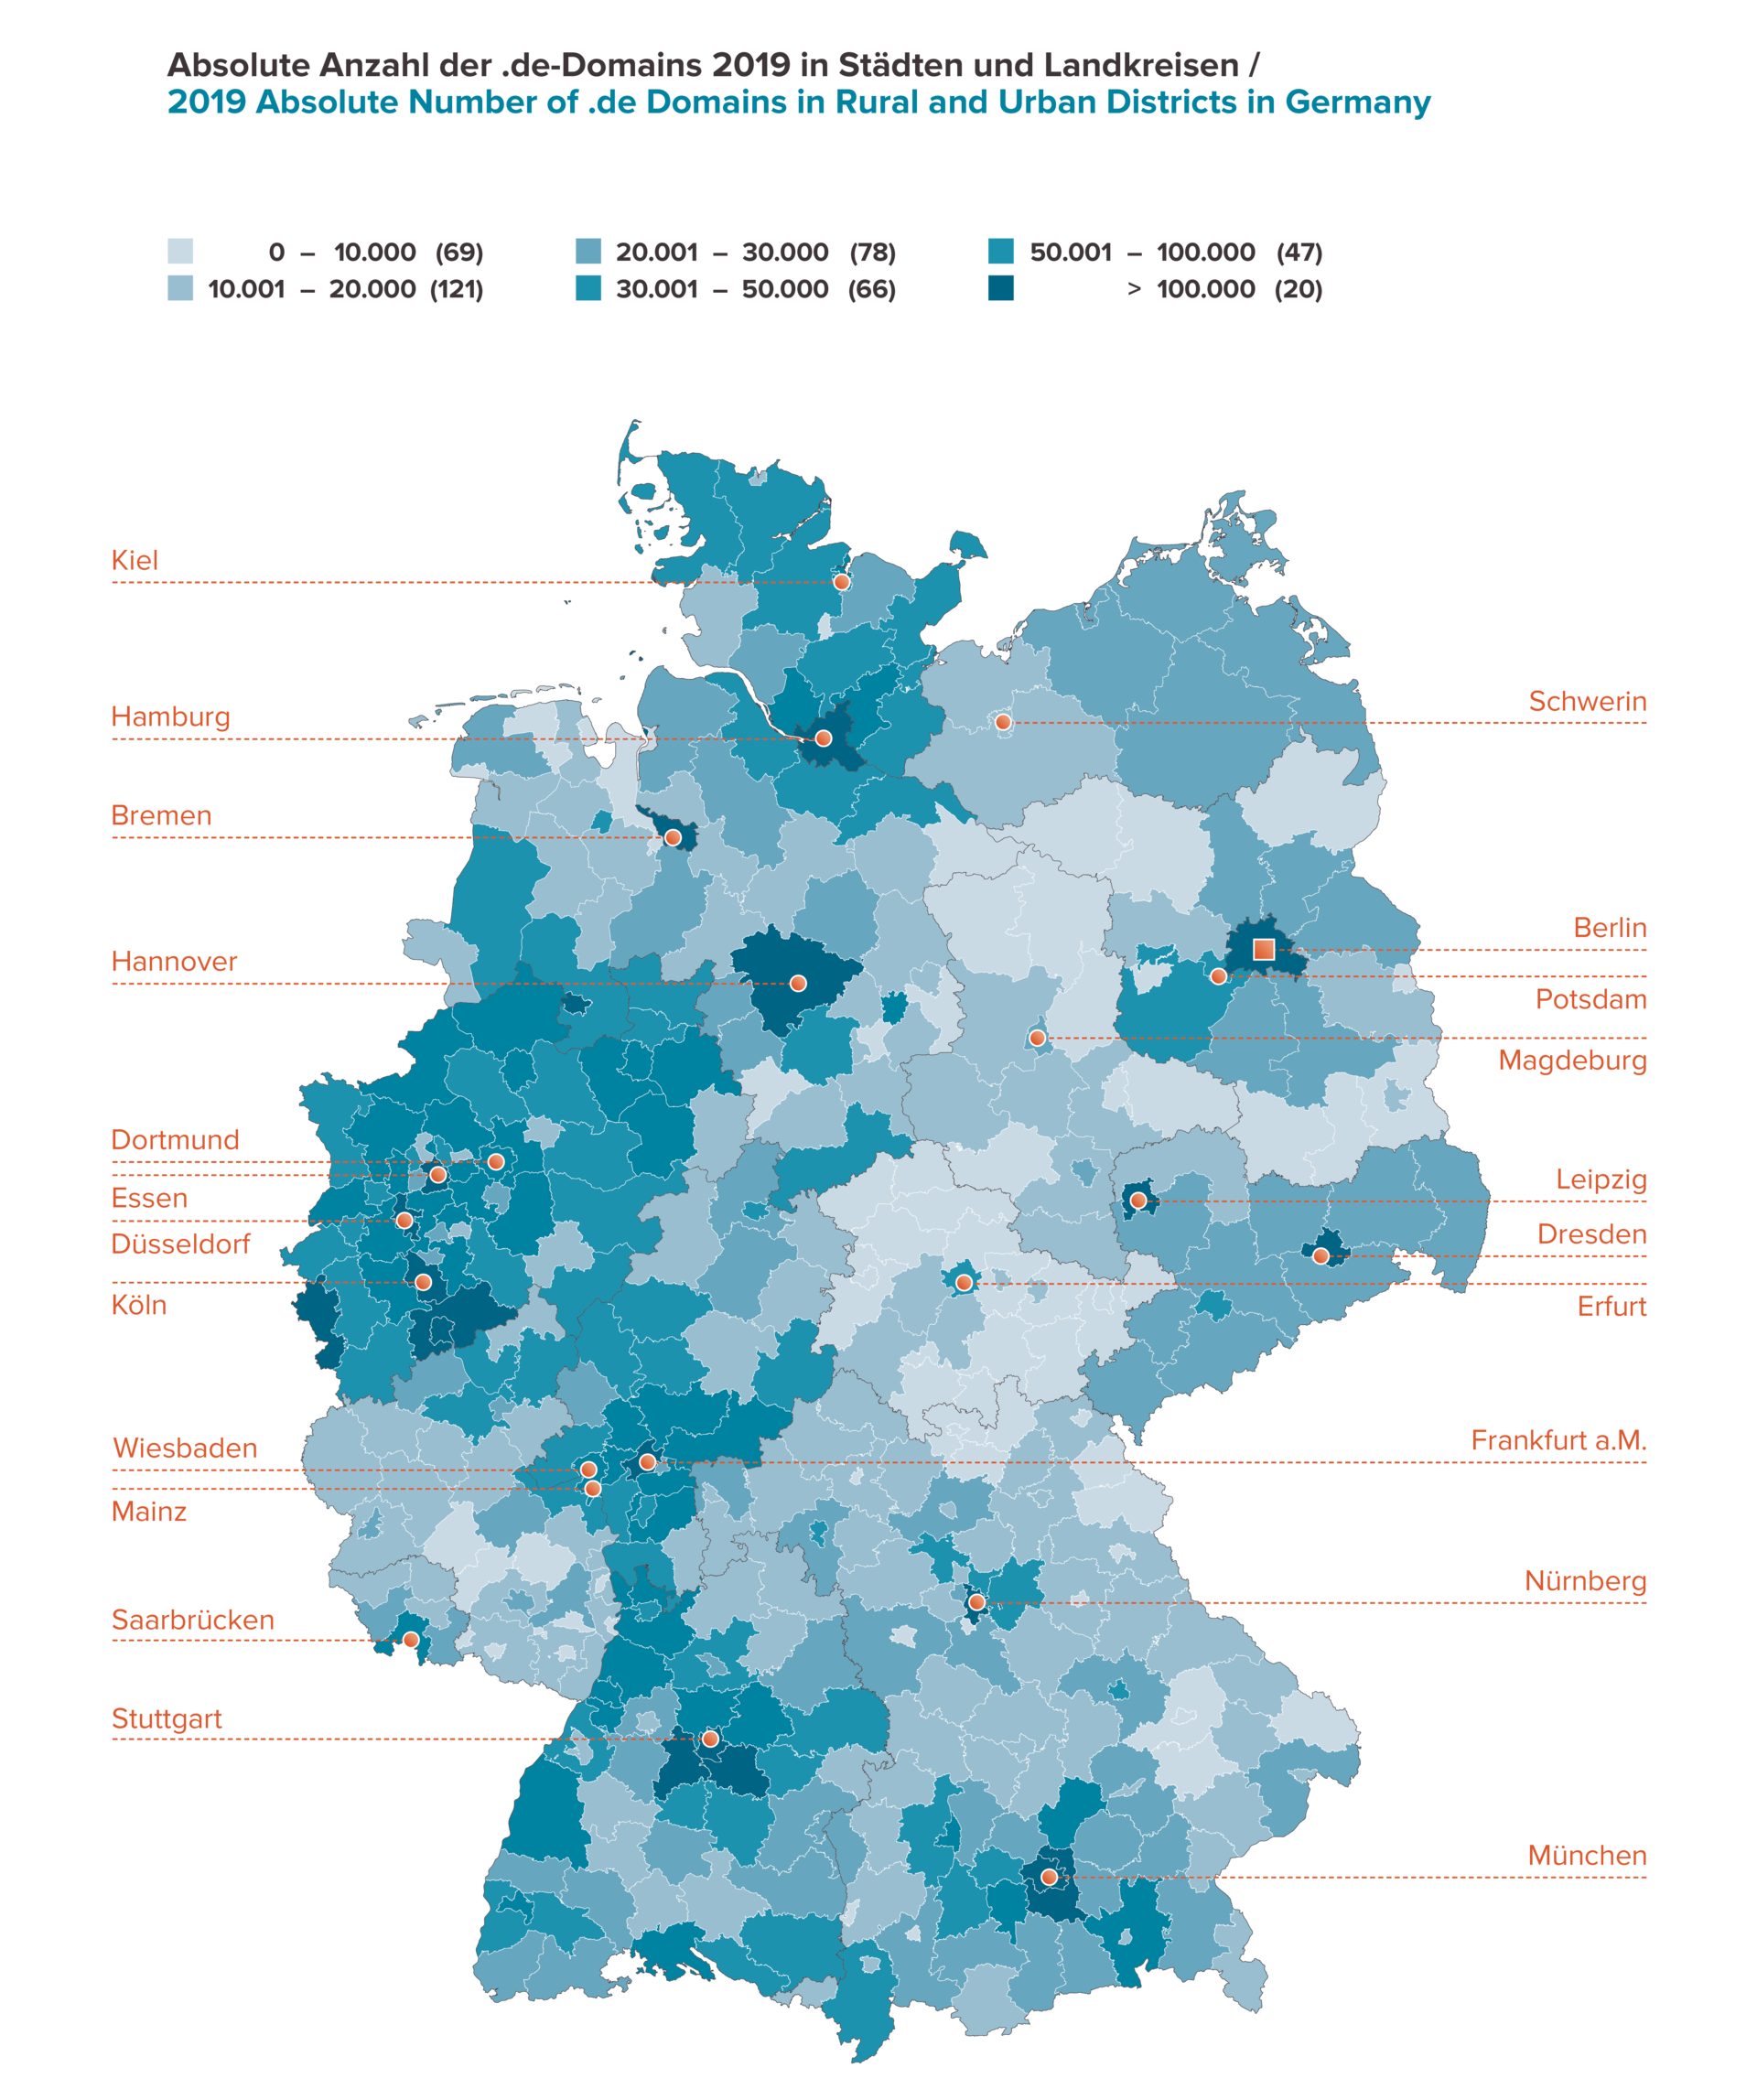 Absolute Number of .de Domains in Cities and Districts in Germany 2019